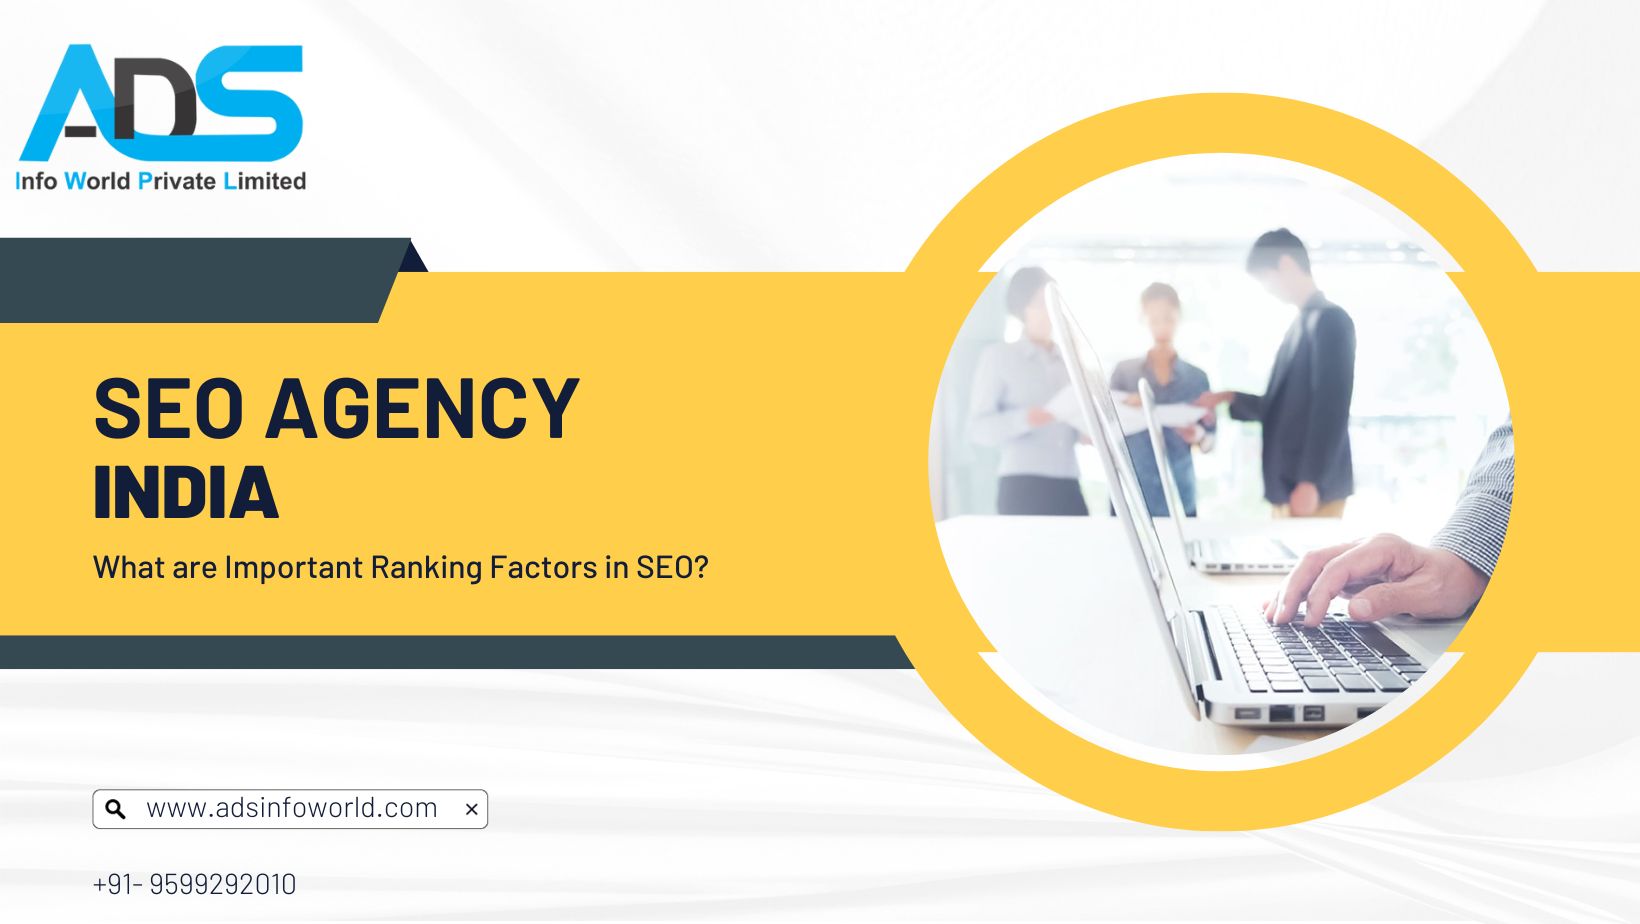 What are Important Ranking Factors in SEO?